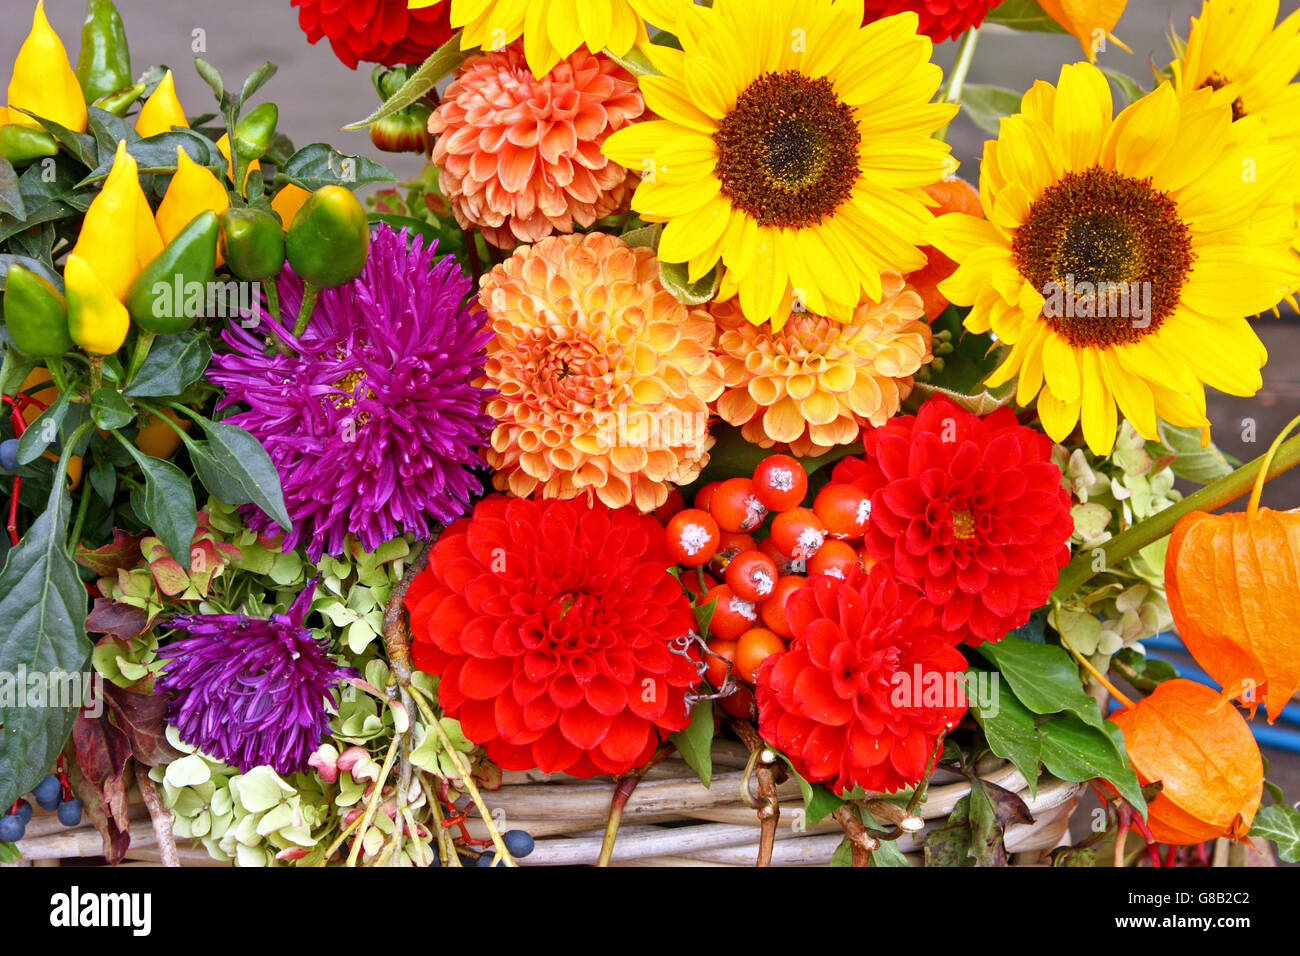 Decoration of a mixture of various flowers, natural background Stock Photo